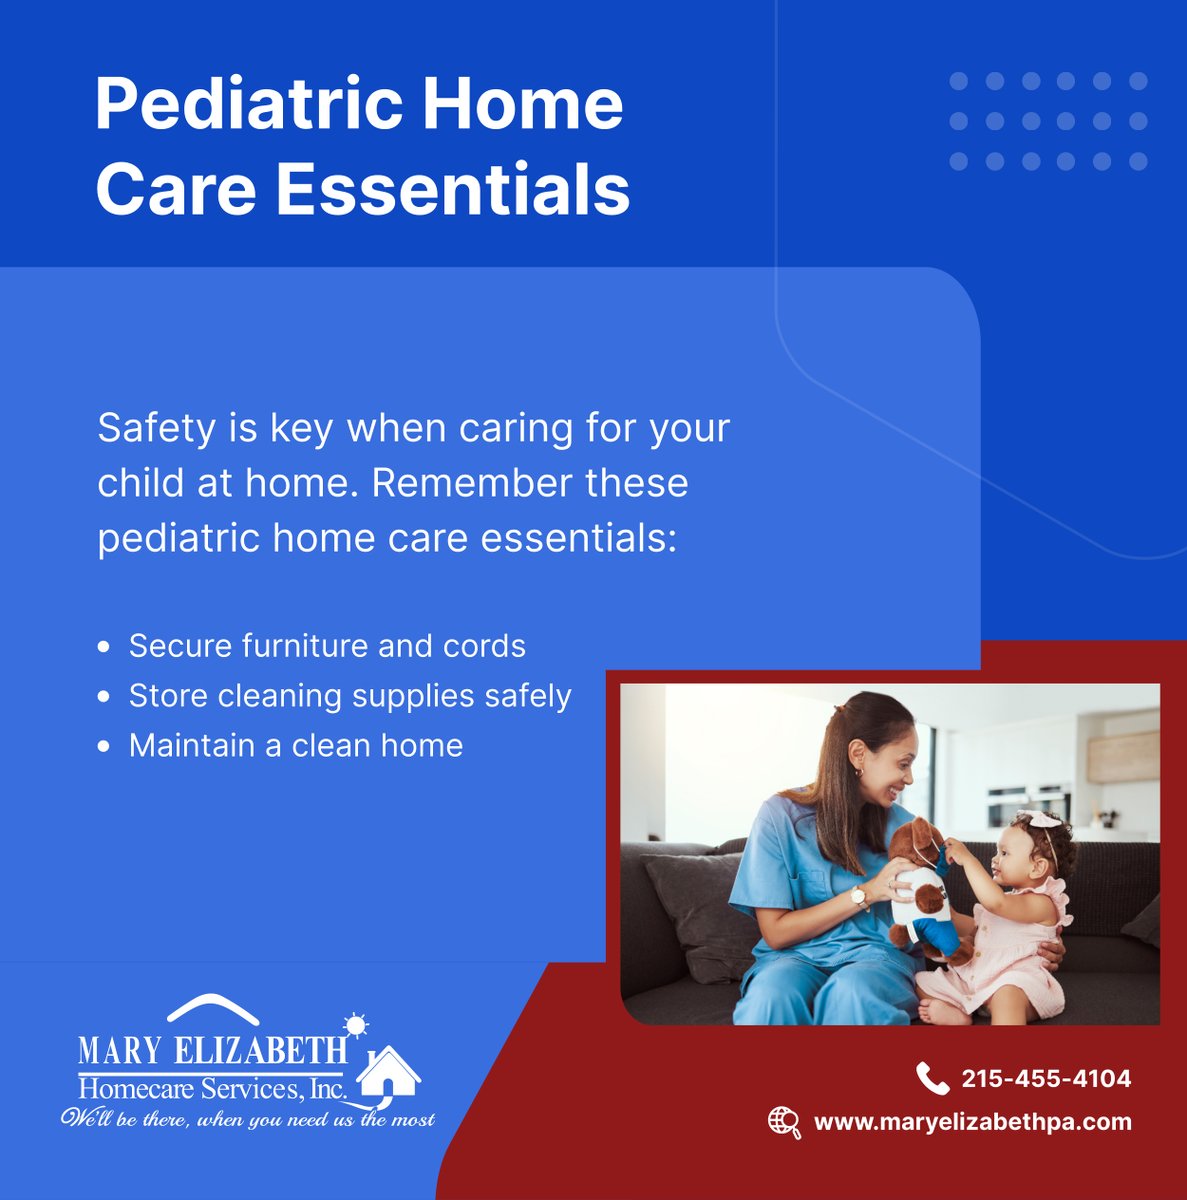 Your child's safety should always come first! These crucial guidelines for pediatric home care are designed to ensure your child's well-being within the home environment.

#PhiladelphiaPA #HomeCare #PediatricHomeCare